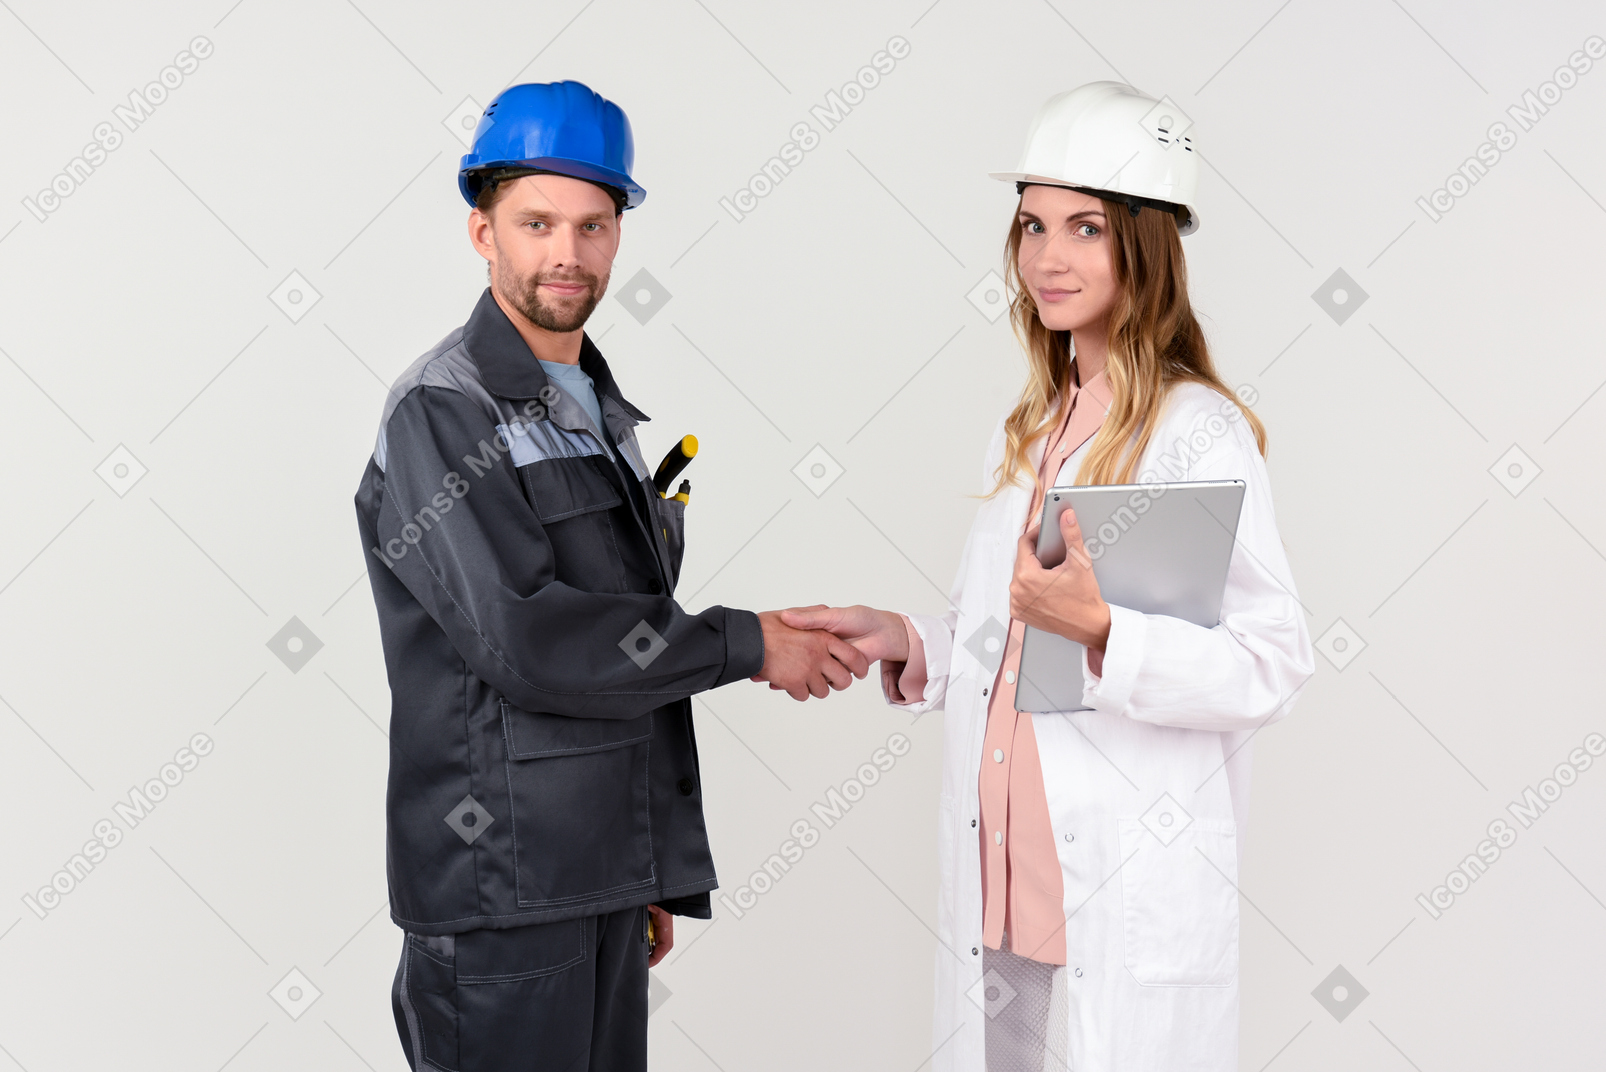 Engineers shaking hands at work